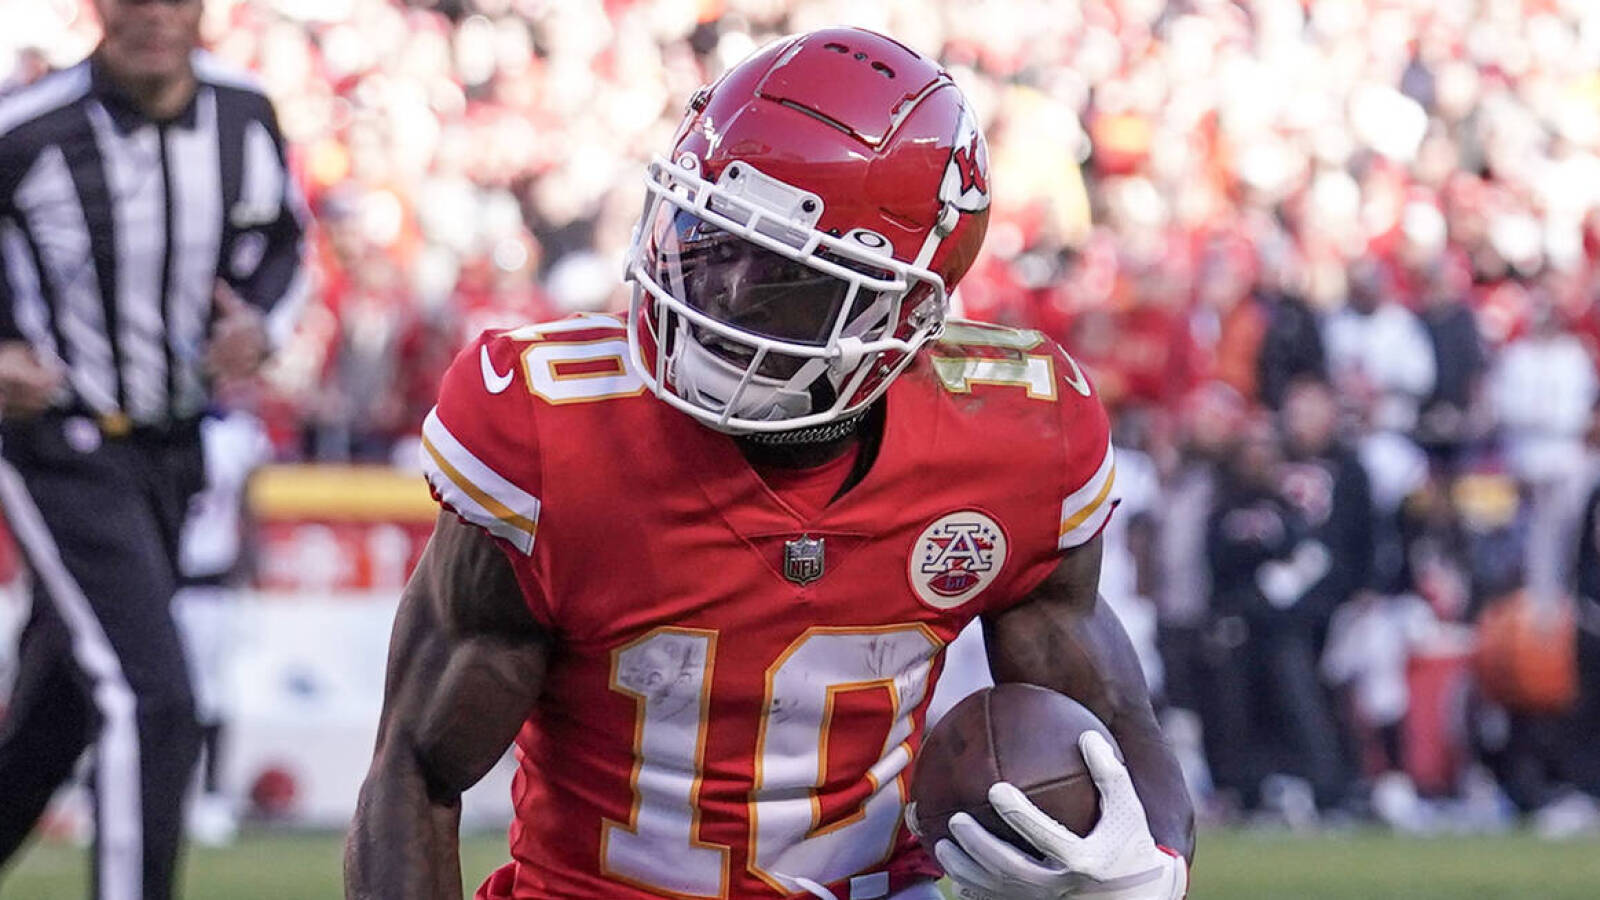 Chiefs GM: Trading Tyreek Hill 'incredibly difficult' but 'necessary'